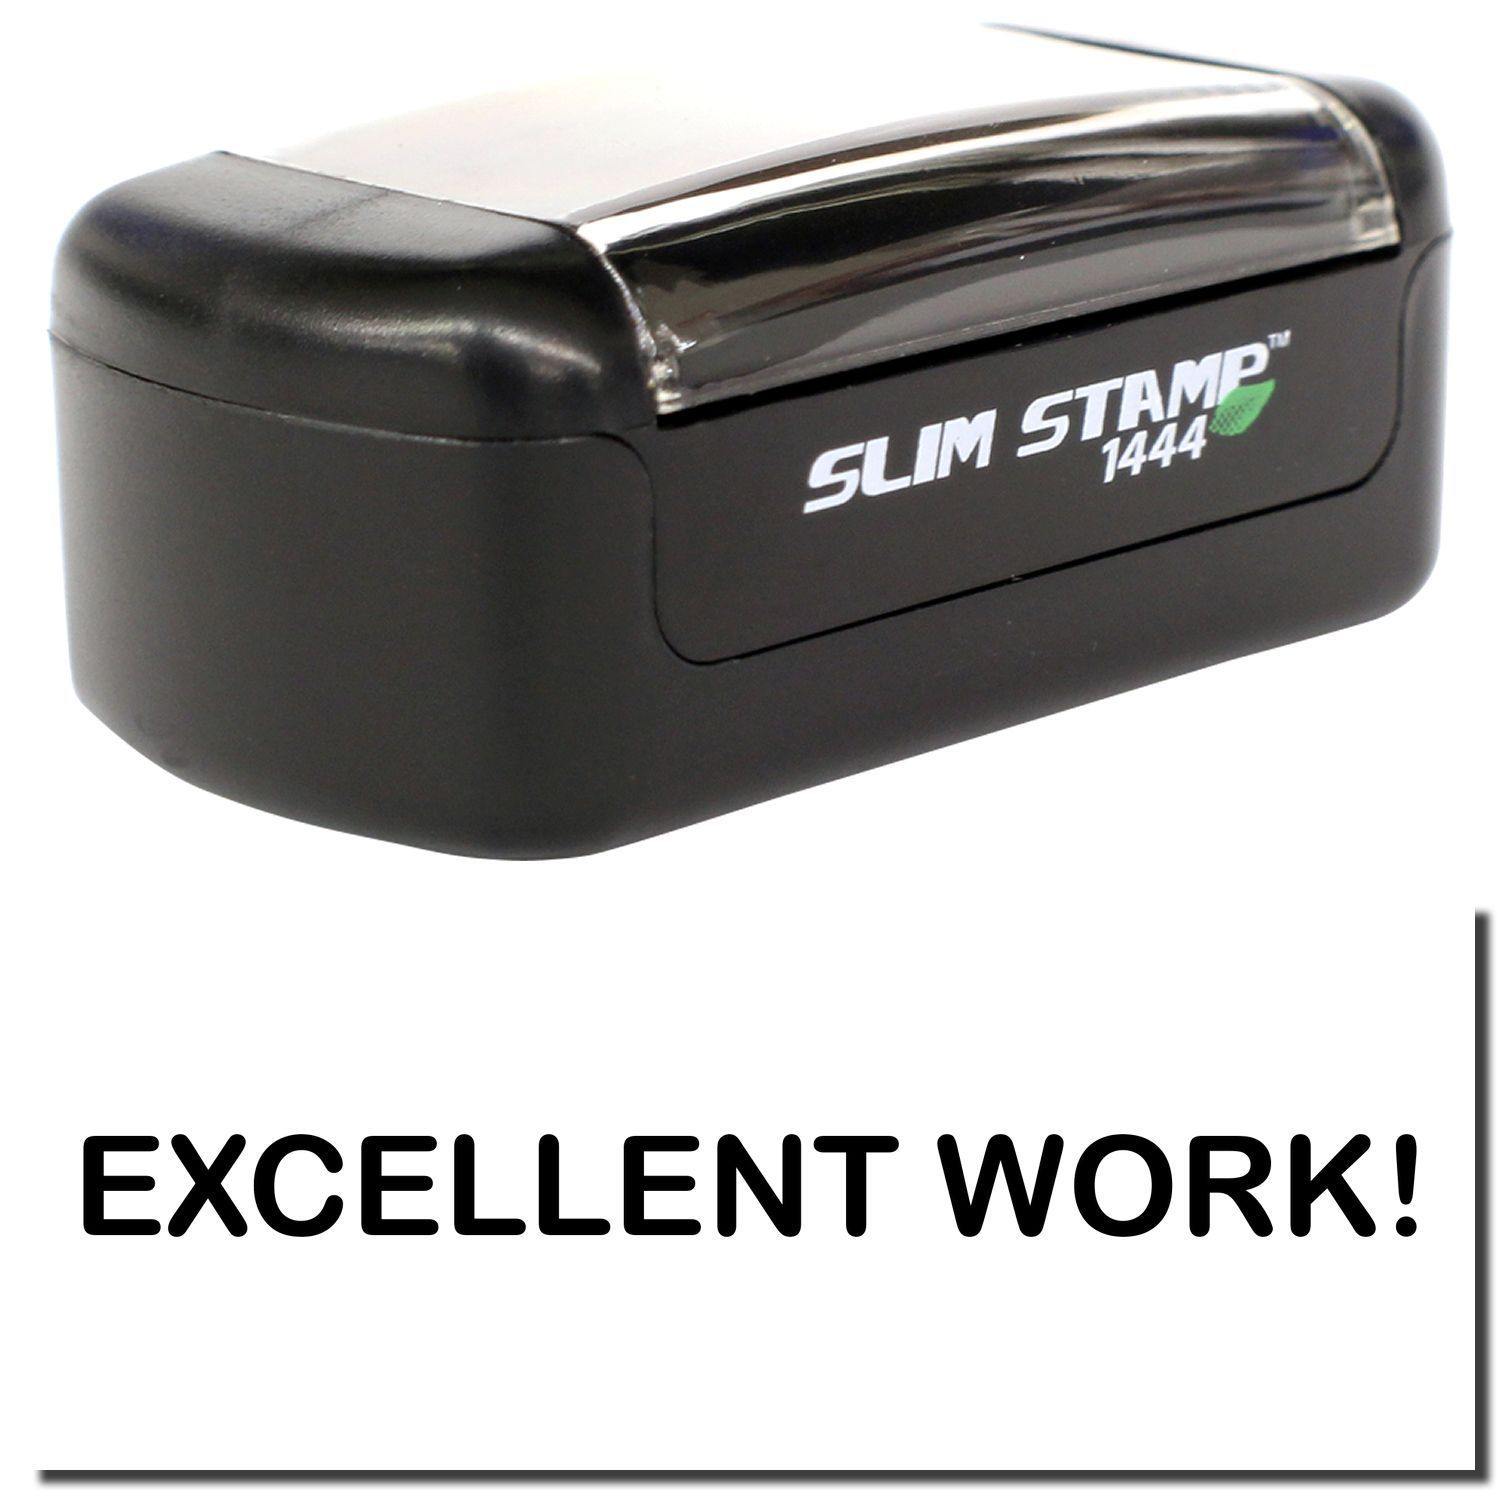 A stock office pre-inked stamp with a stamped image showing how the text "EXCELLENT WORK!" is displayed after stamping.